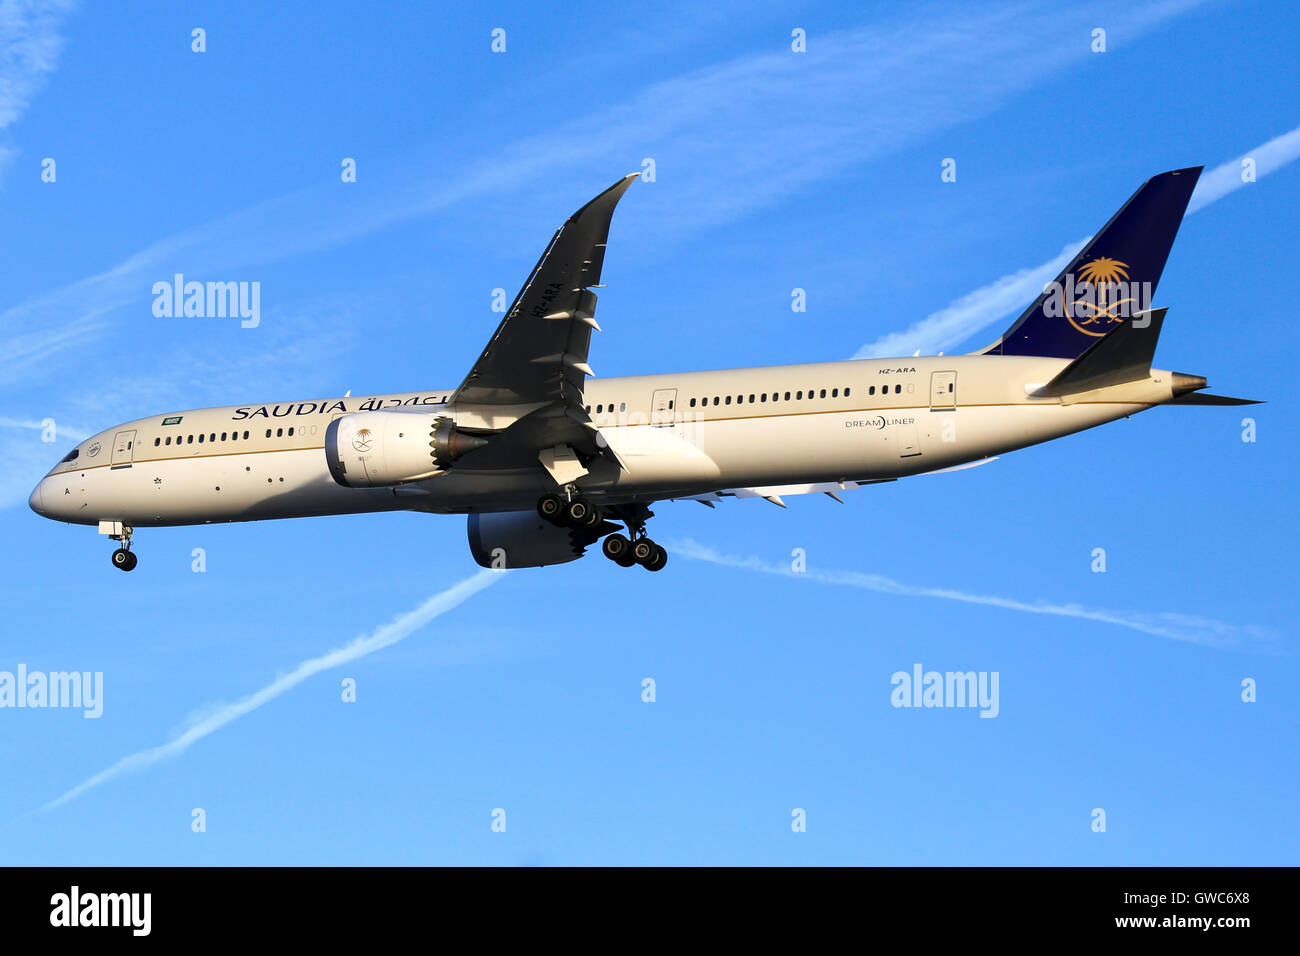 Saudi Arabian Airlines Boeing 787-9 approaches runway 23R at Manchester airport. Stock Photo